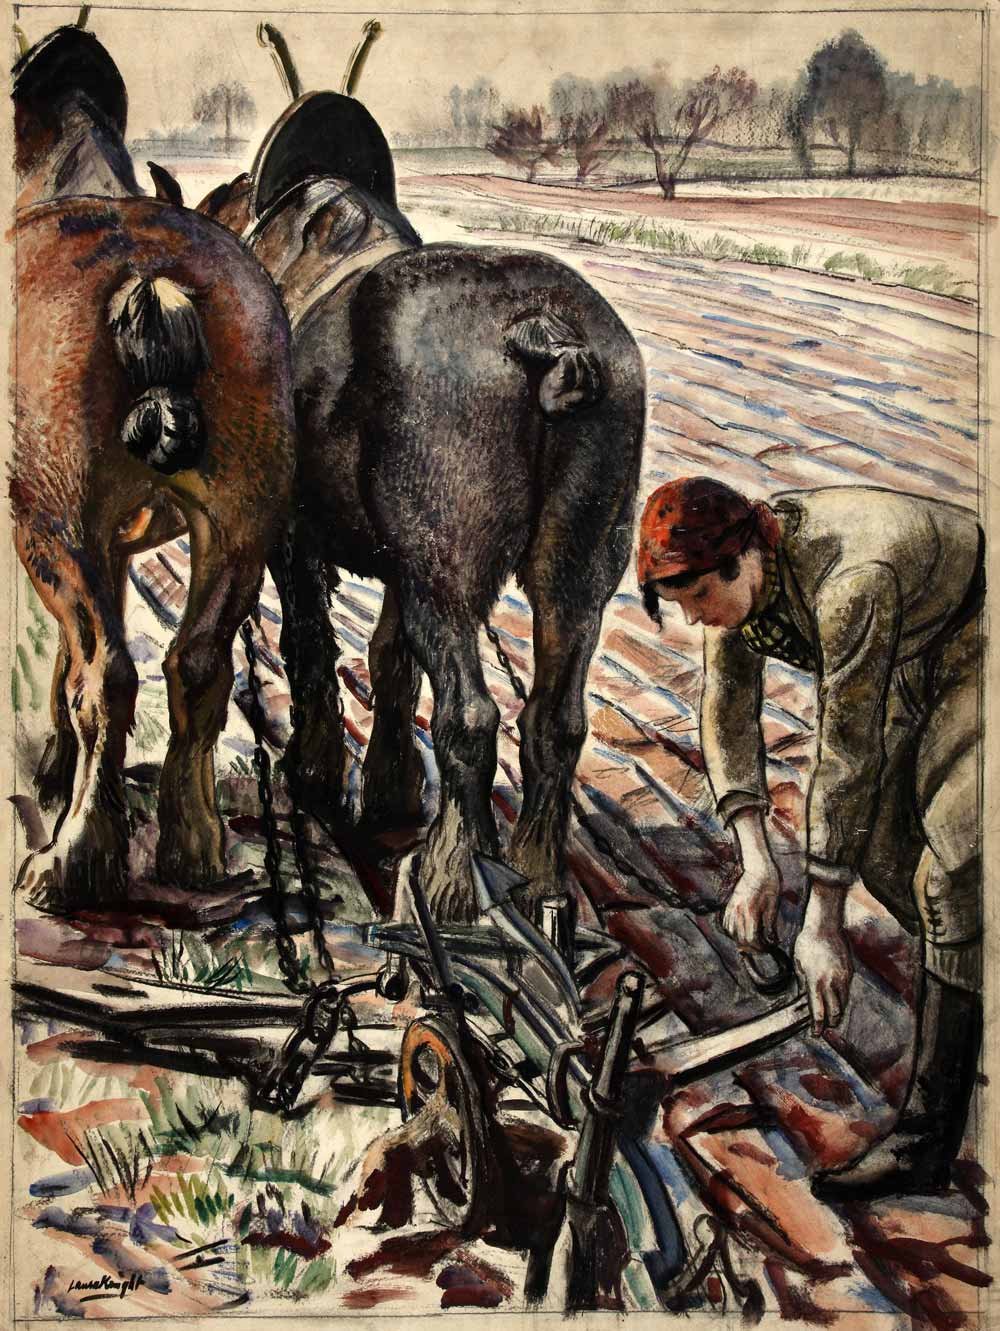 A woman wearing a red headscarf bends over a wheeled plough chained to two horses in a ridged field.